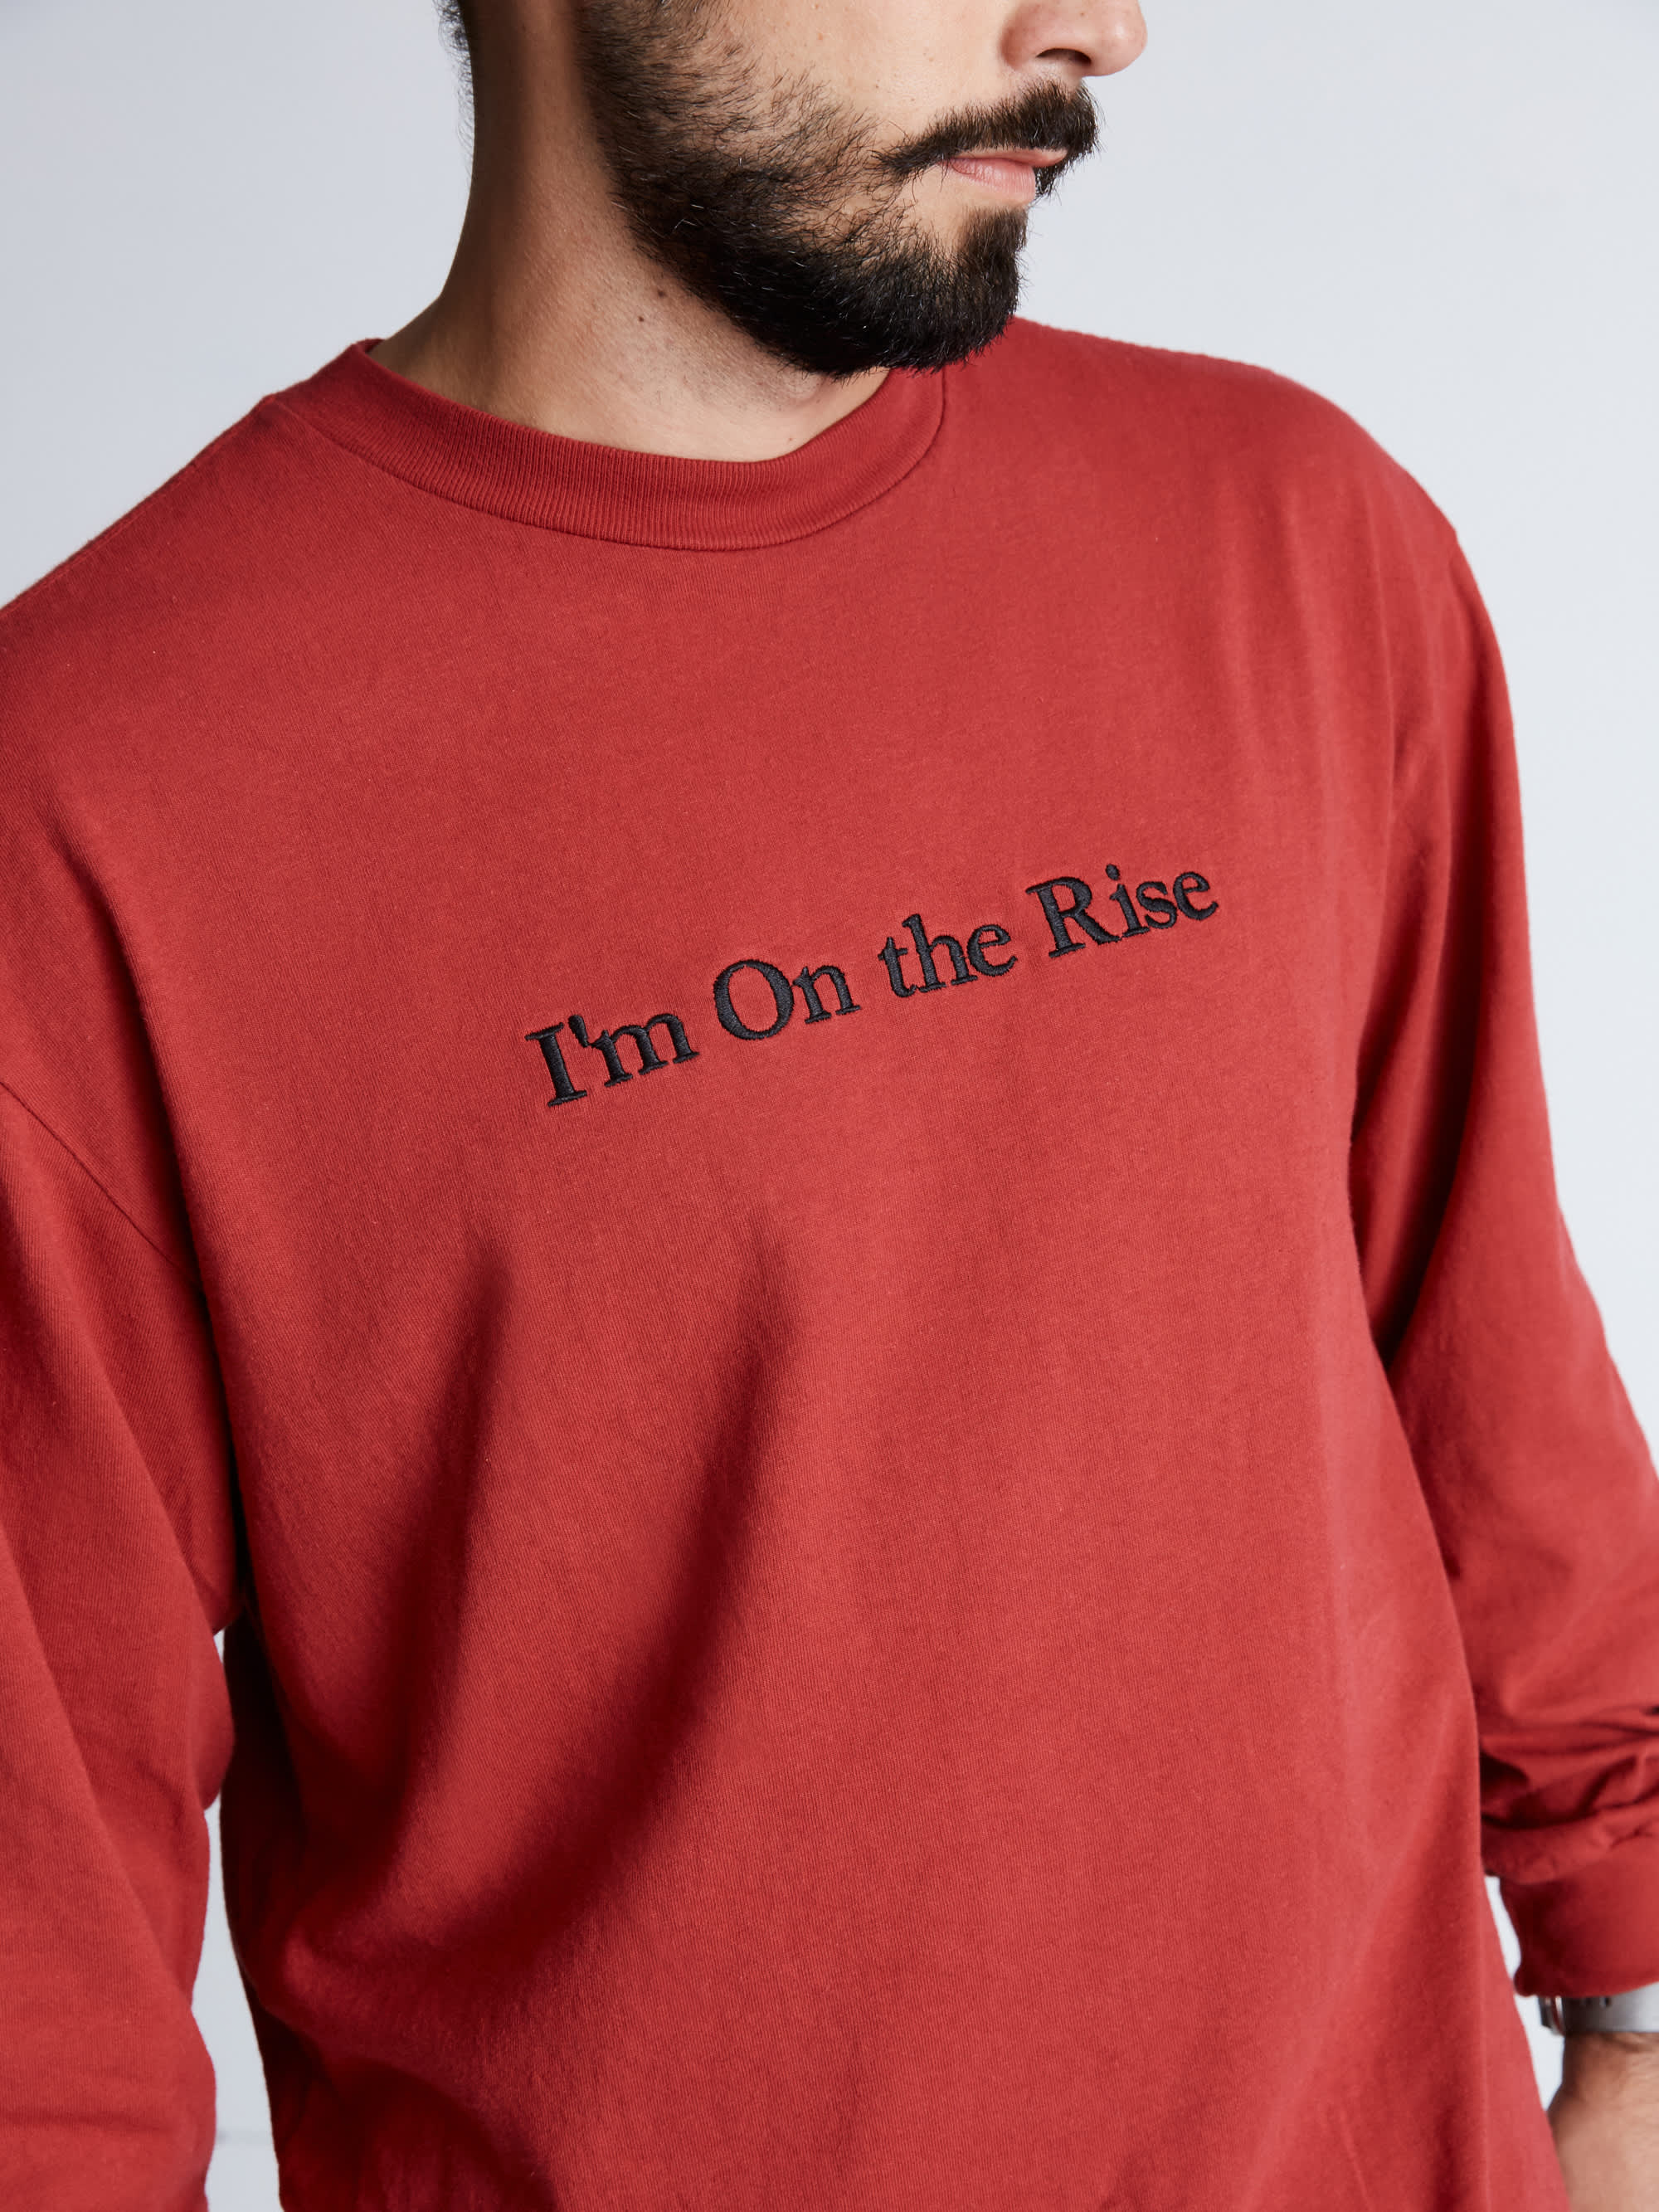 ON THE RISE LONG SLEEVE SHIRT 